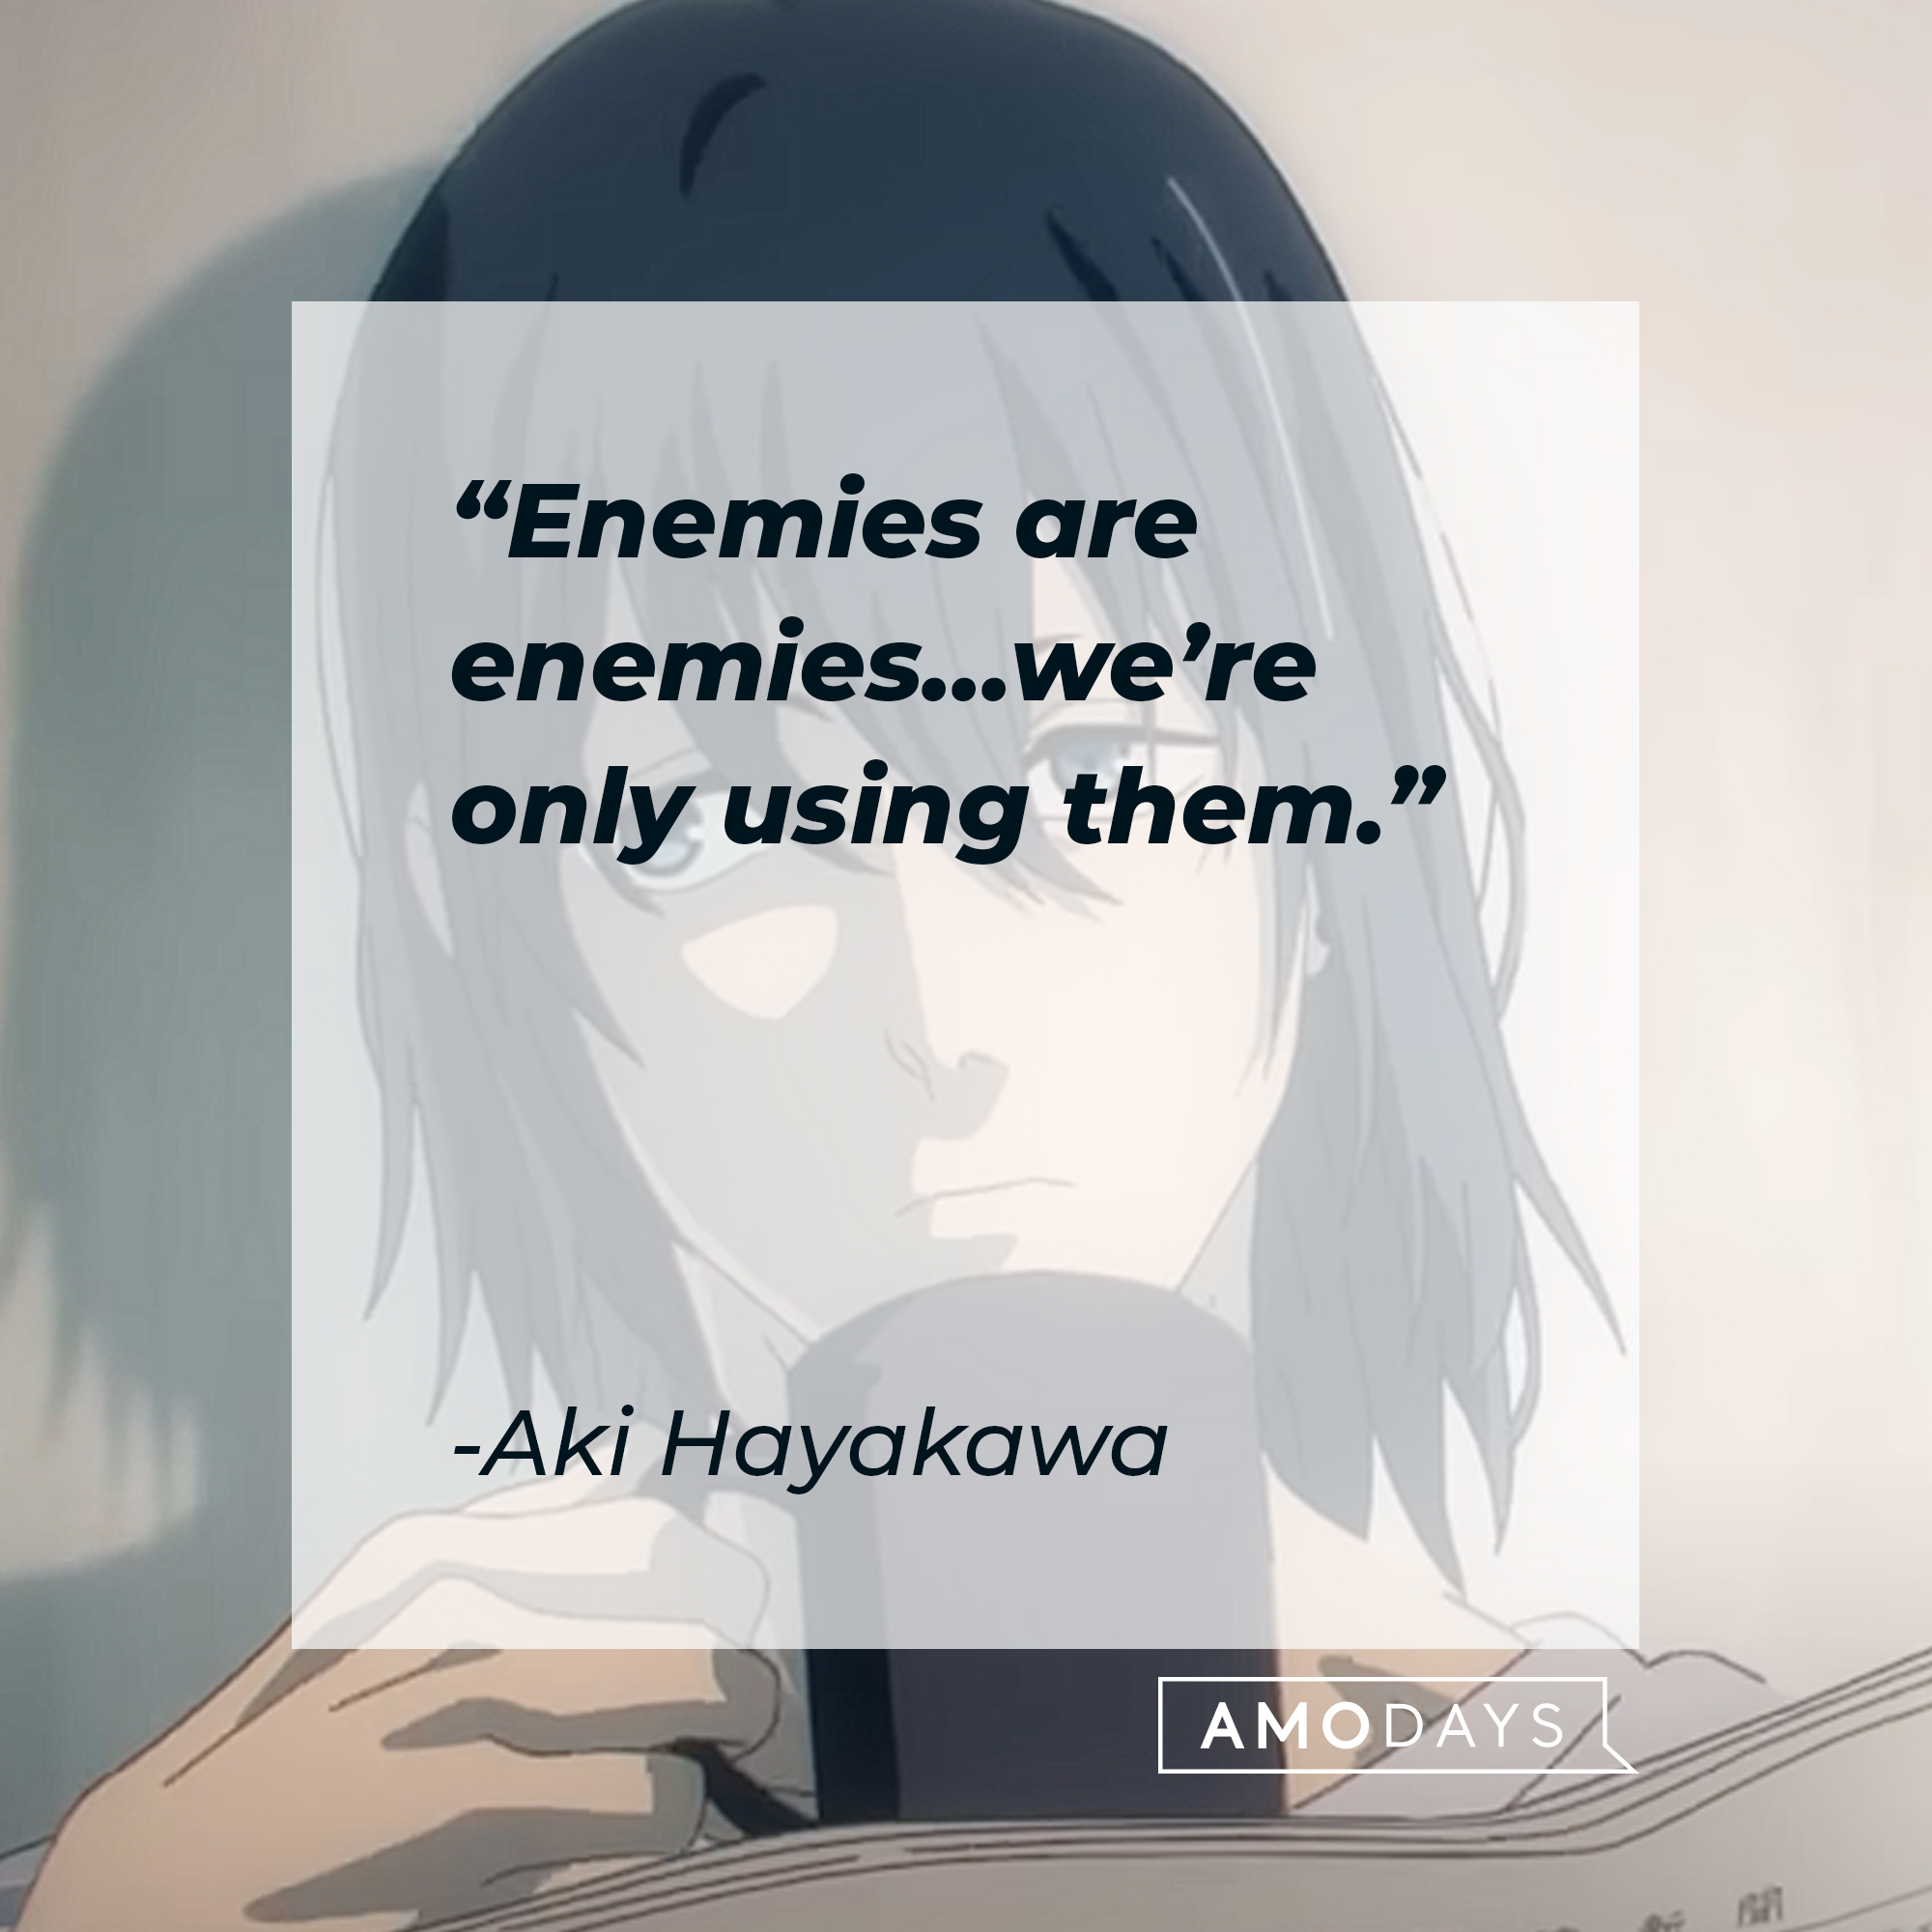 An image of Aki Hayakawa with his quote: "Enemies are enemies…we’re only using them.” | Source: youtube.com/CrunchyrollCollection